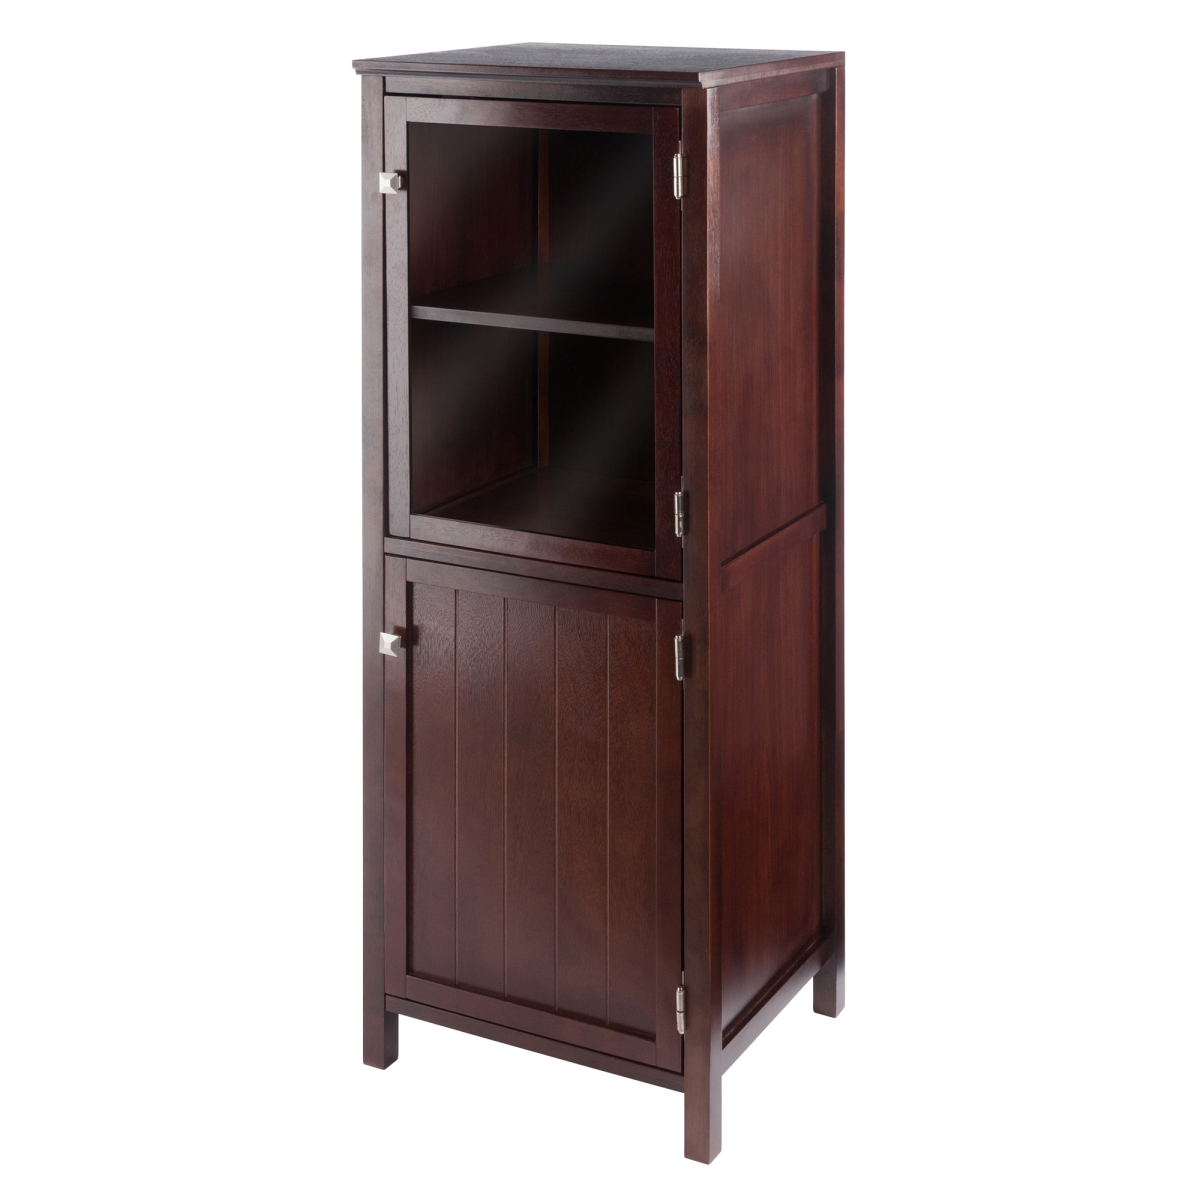 94401 17.3 X 15.7 X 47.4 In. Brooke Jelly Cupboard With 2-section Cabinet, Walnut